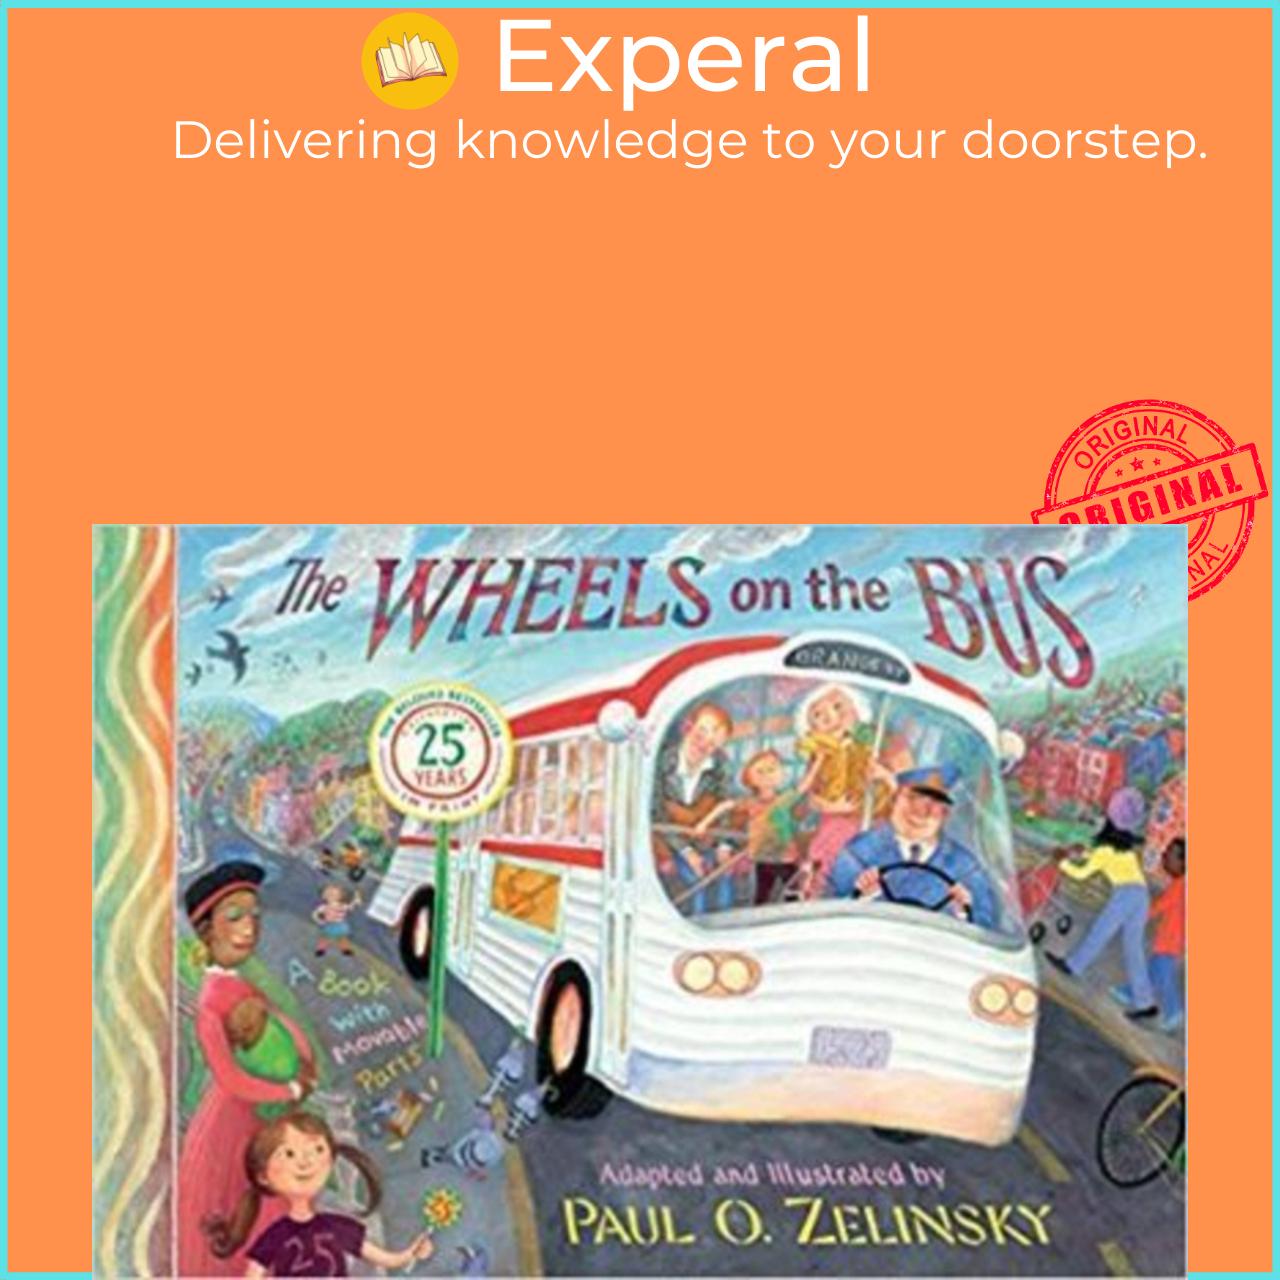 Sách - Wheels on the Bus, the by Paul O. Zelinsky (US edition, paperback)